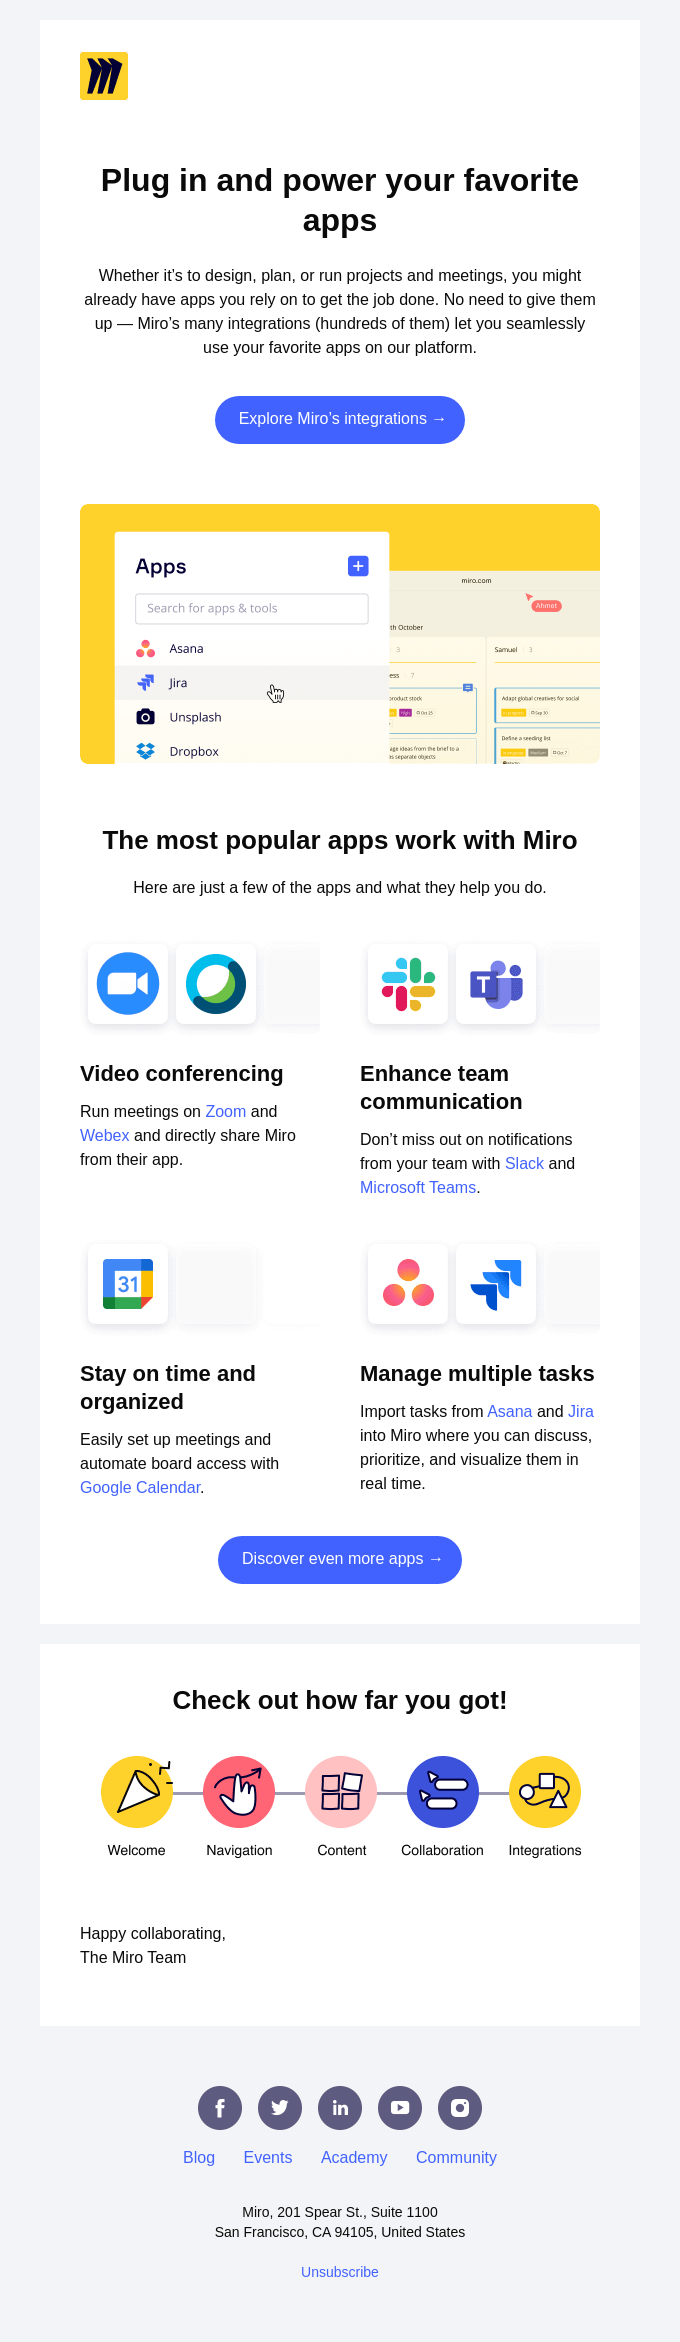 Miro Works with Your Favorite Apps